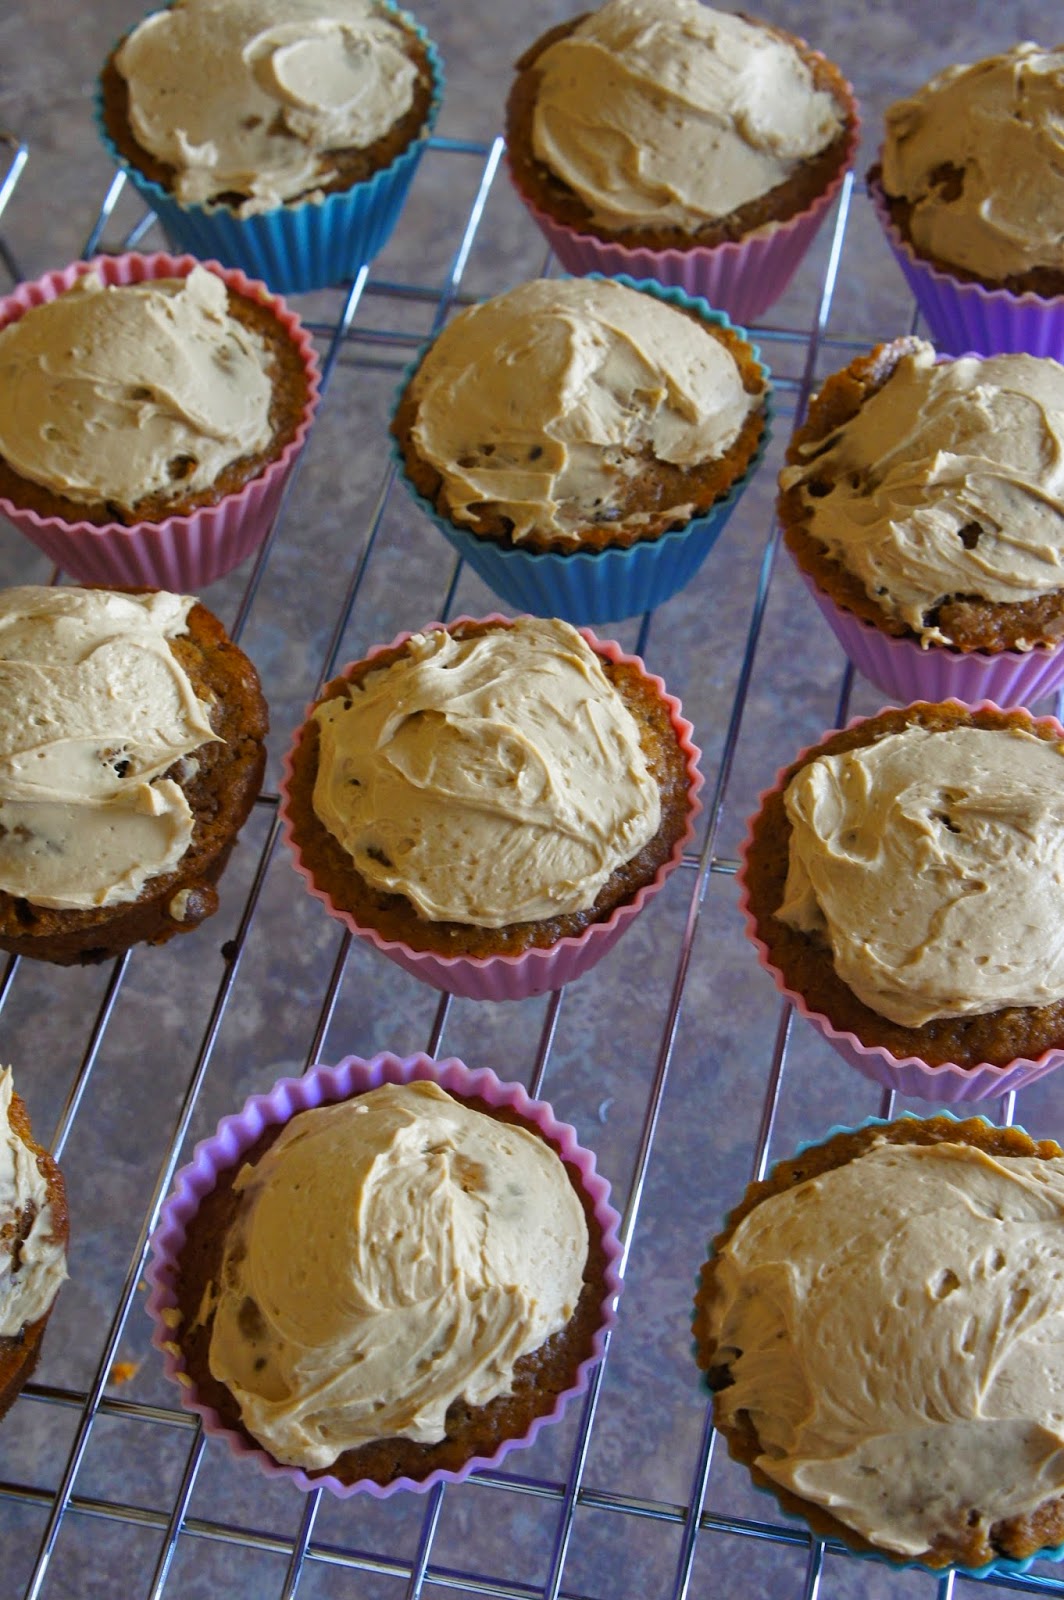 Savory Sweet and Satisfying: Cappuccino Muffins